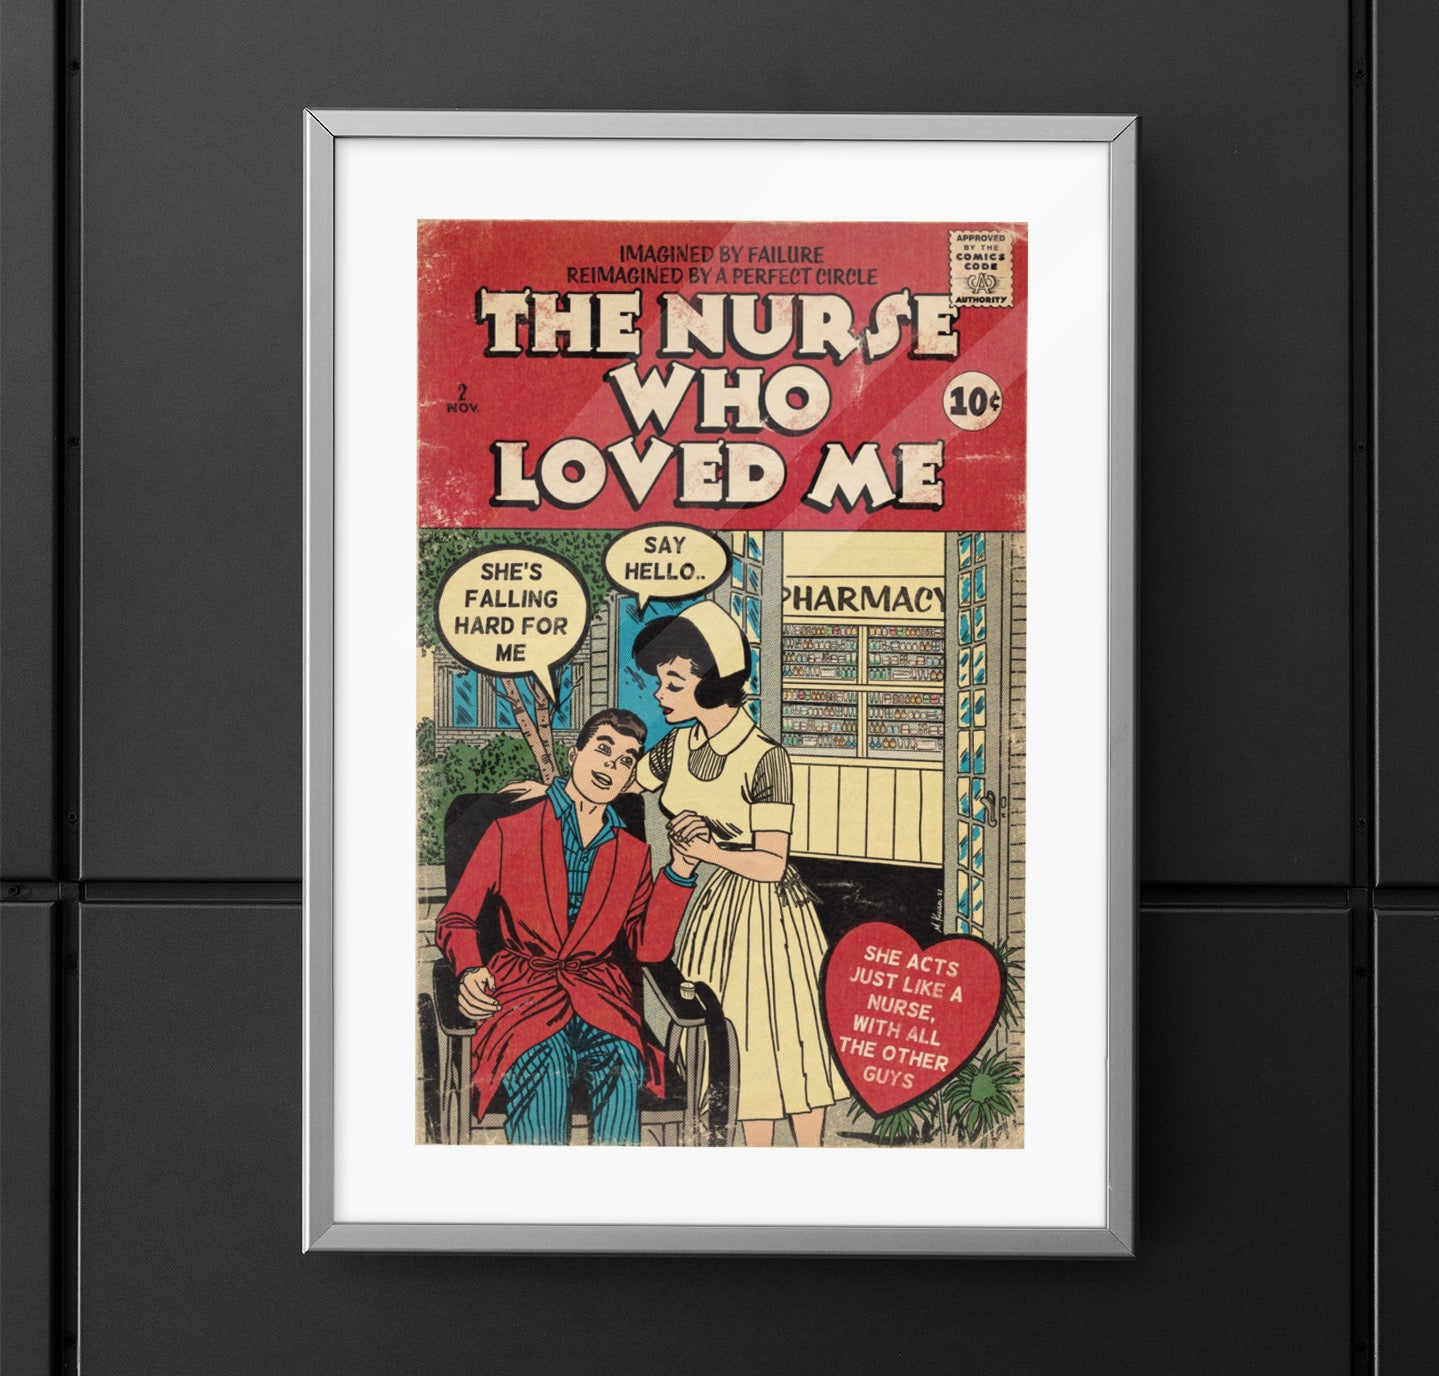 Failure/A Perfect Circle - The Nurse Who Loved Me - Vertical Matte Poster